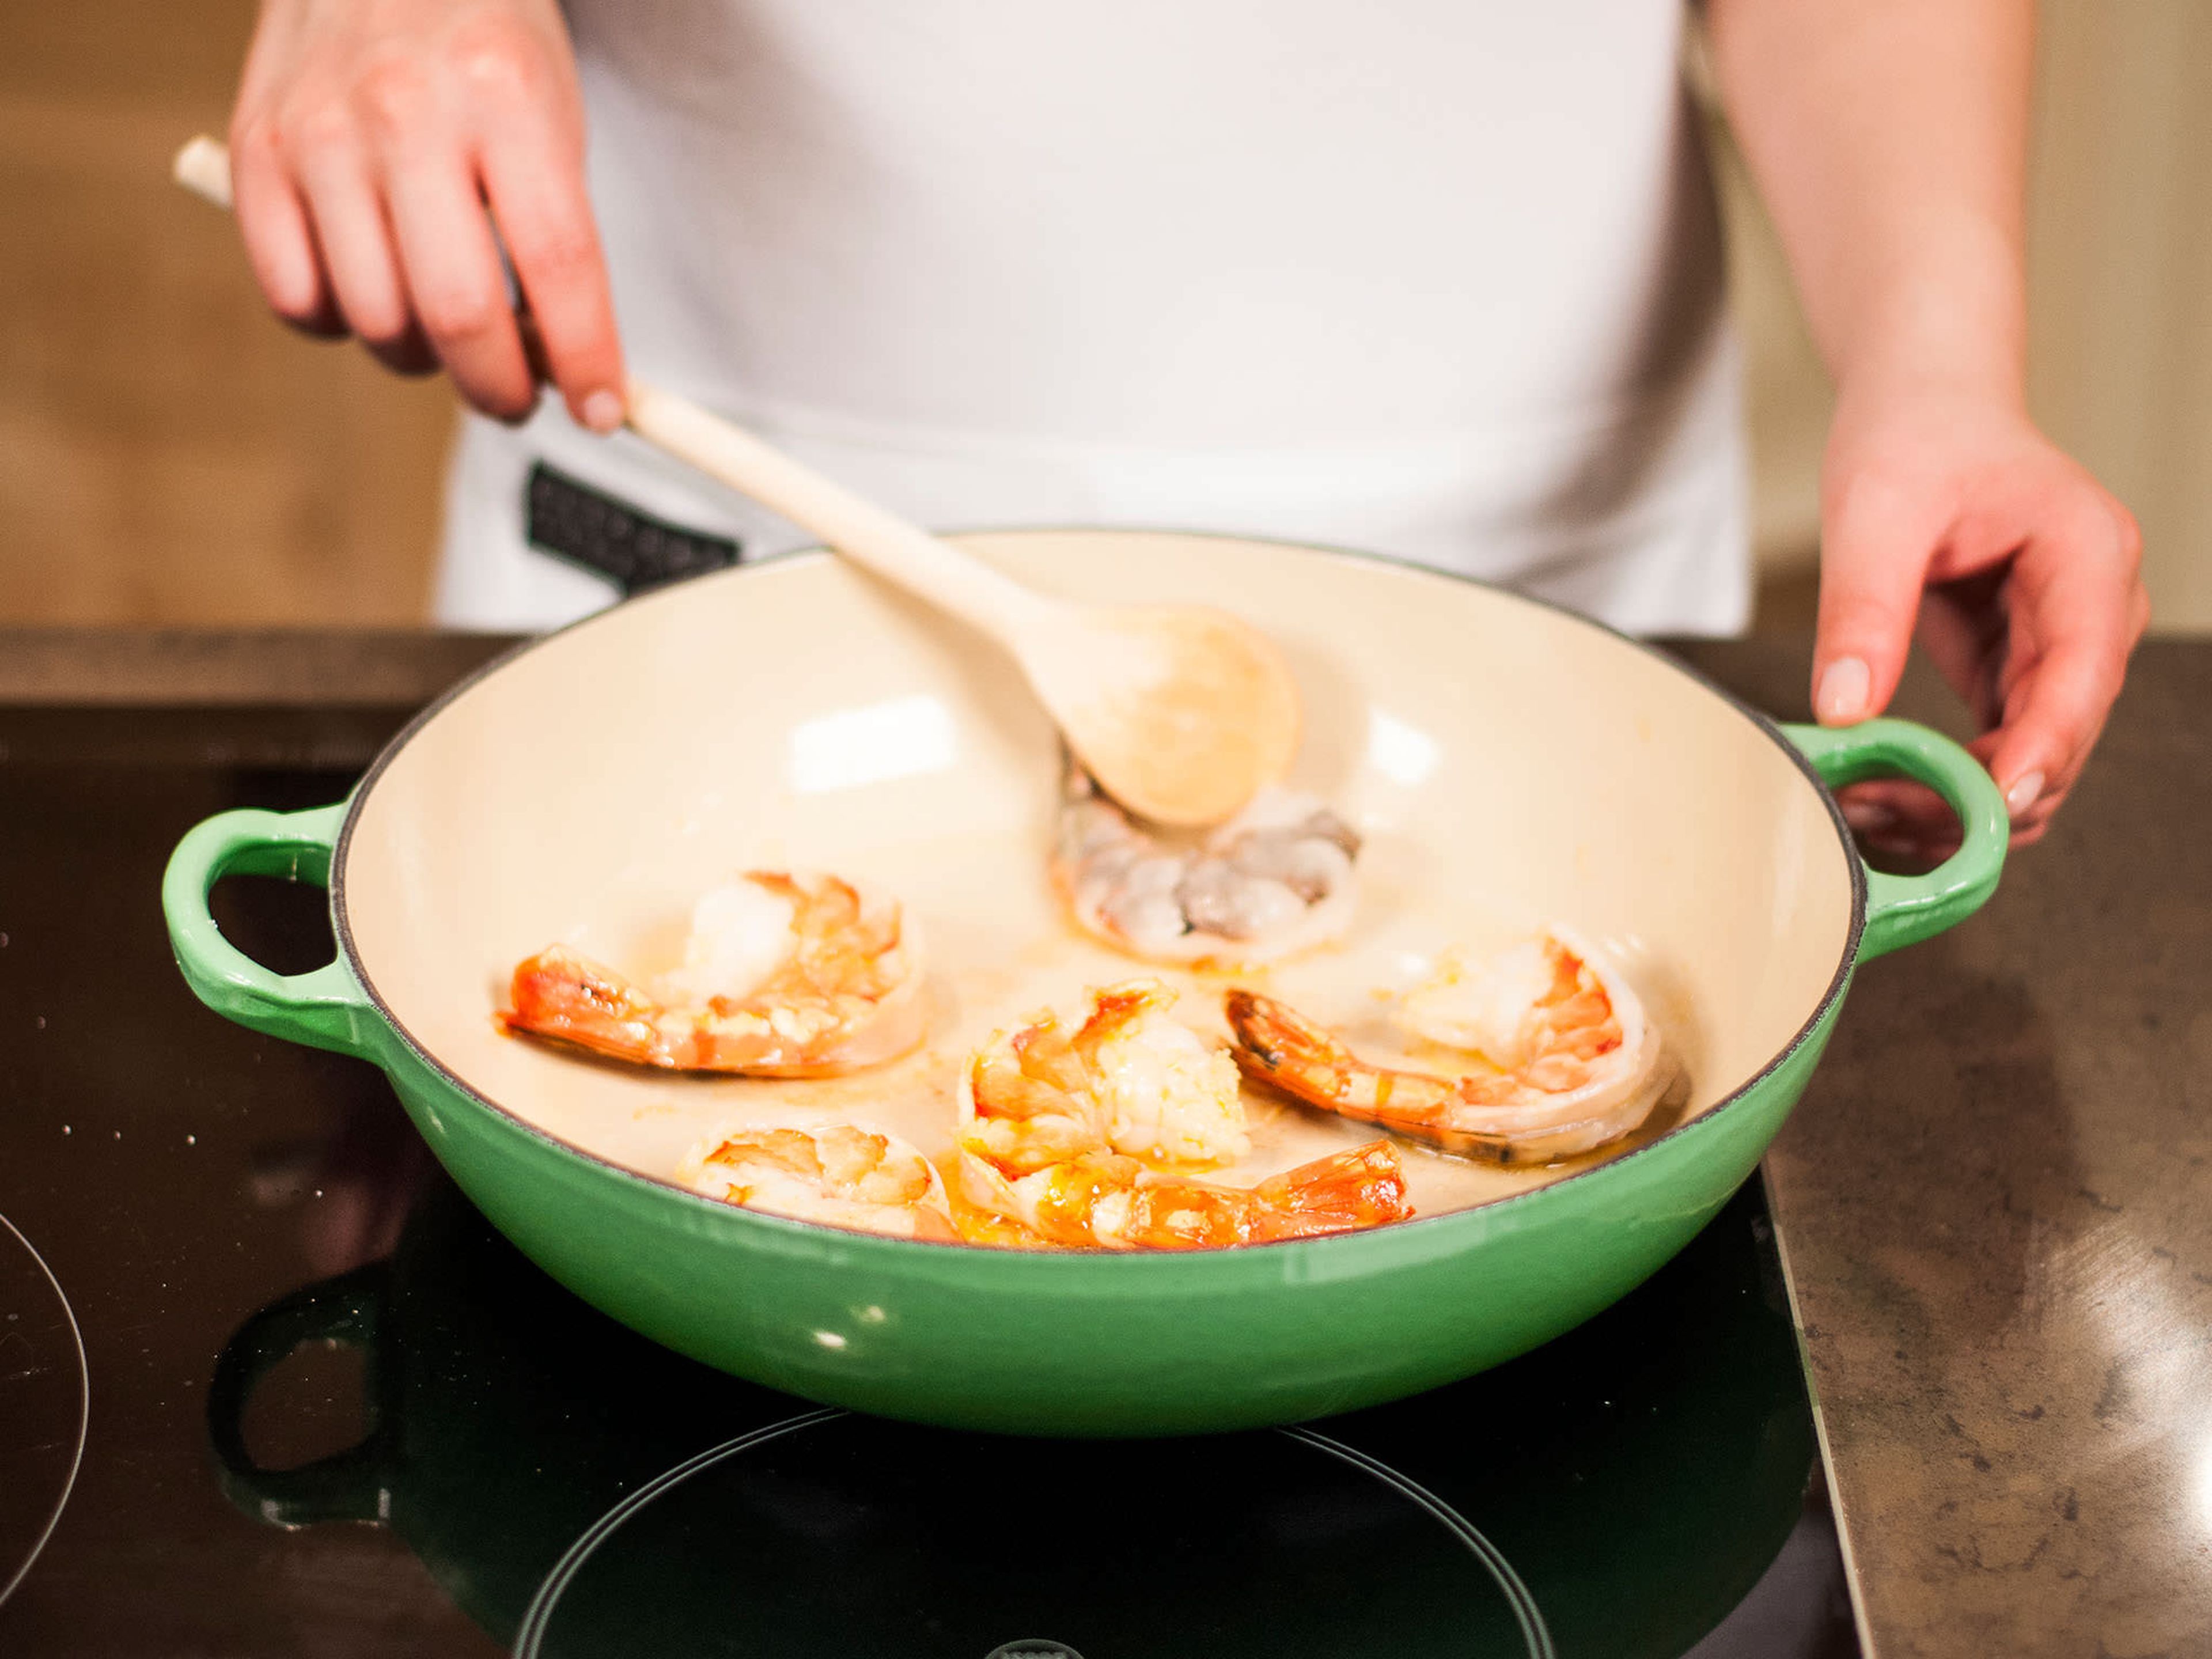 Heat up some olive oil in a frying pan and sear shrimp for approx. 3 – 4 min. until opaque.